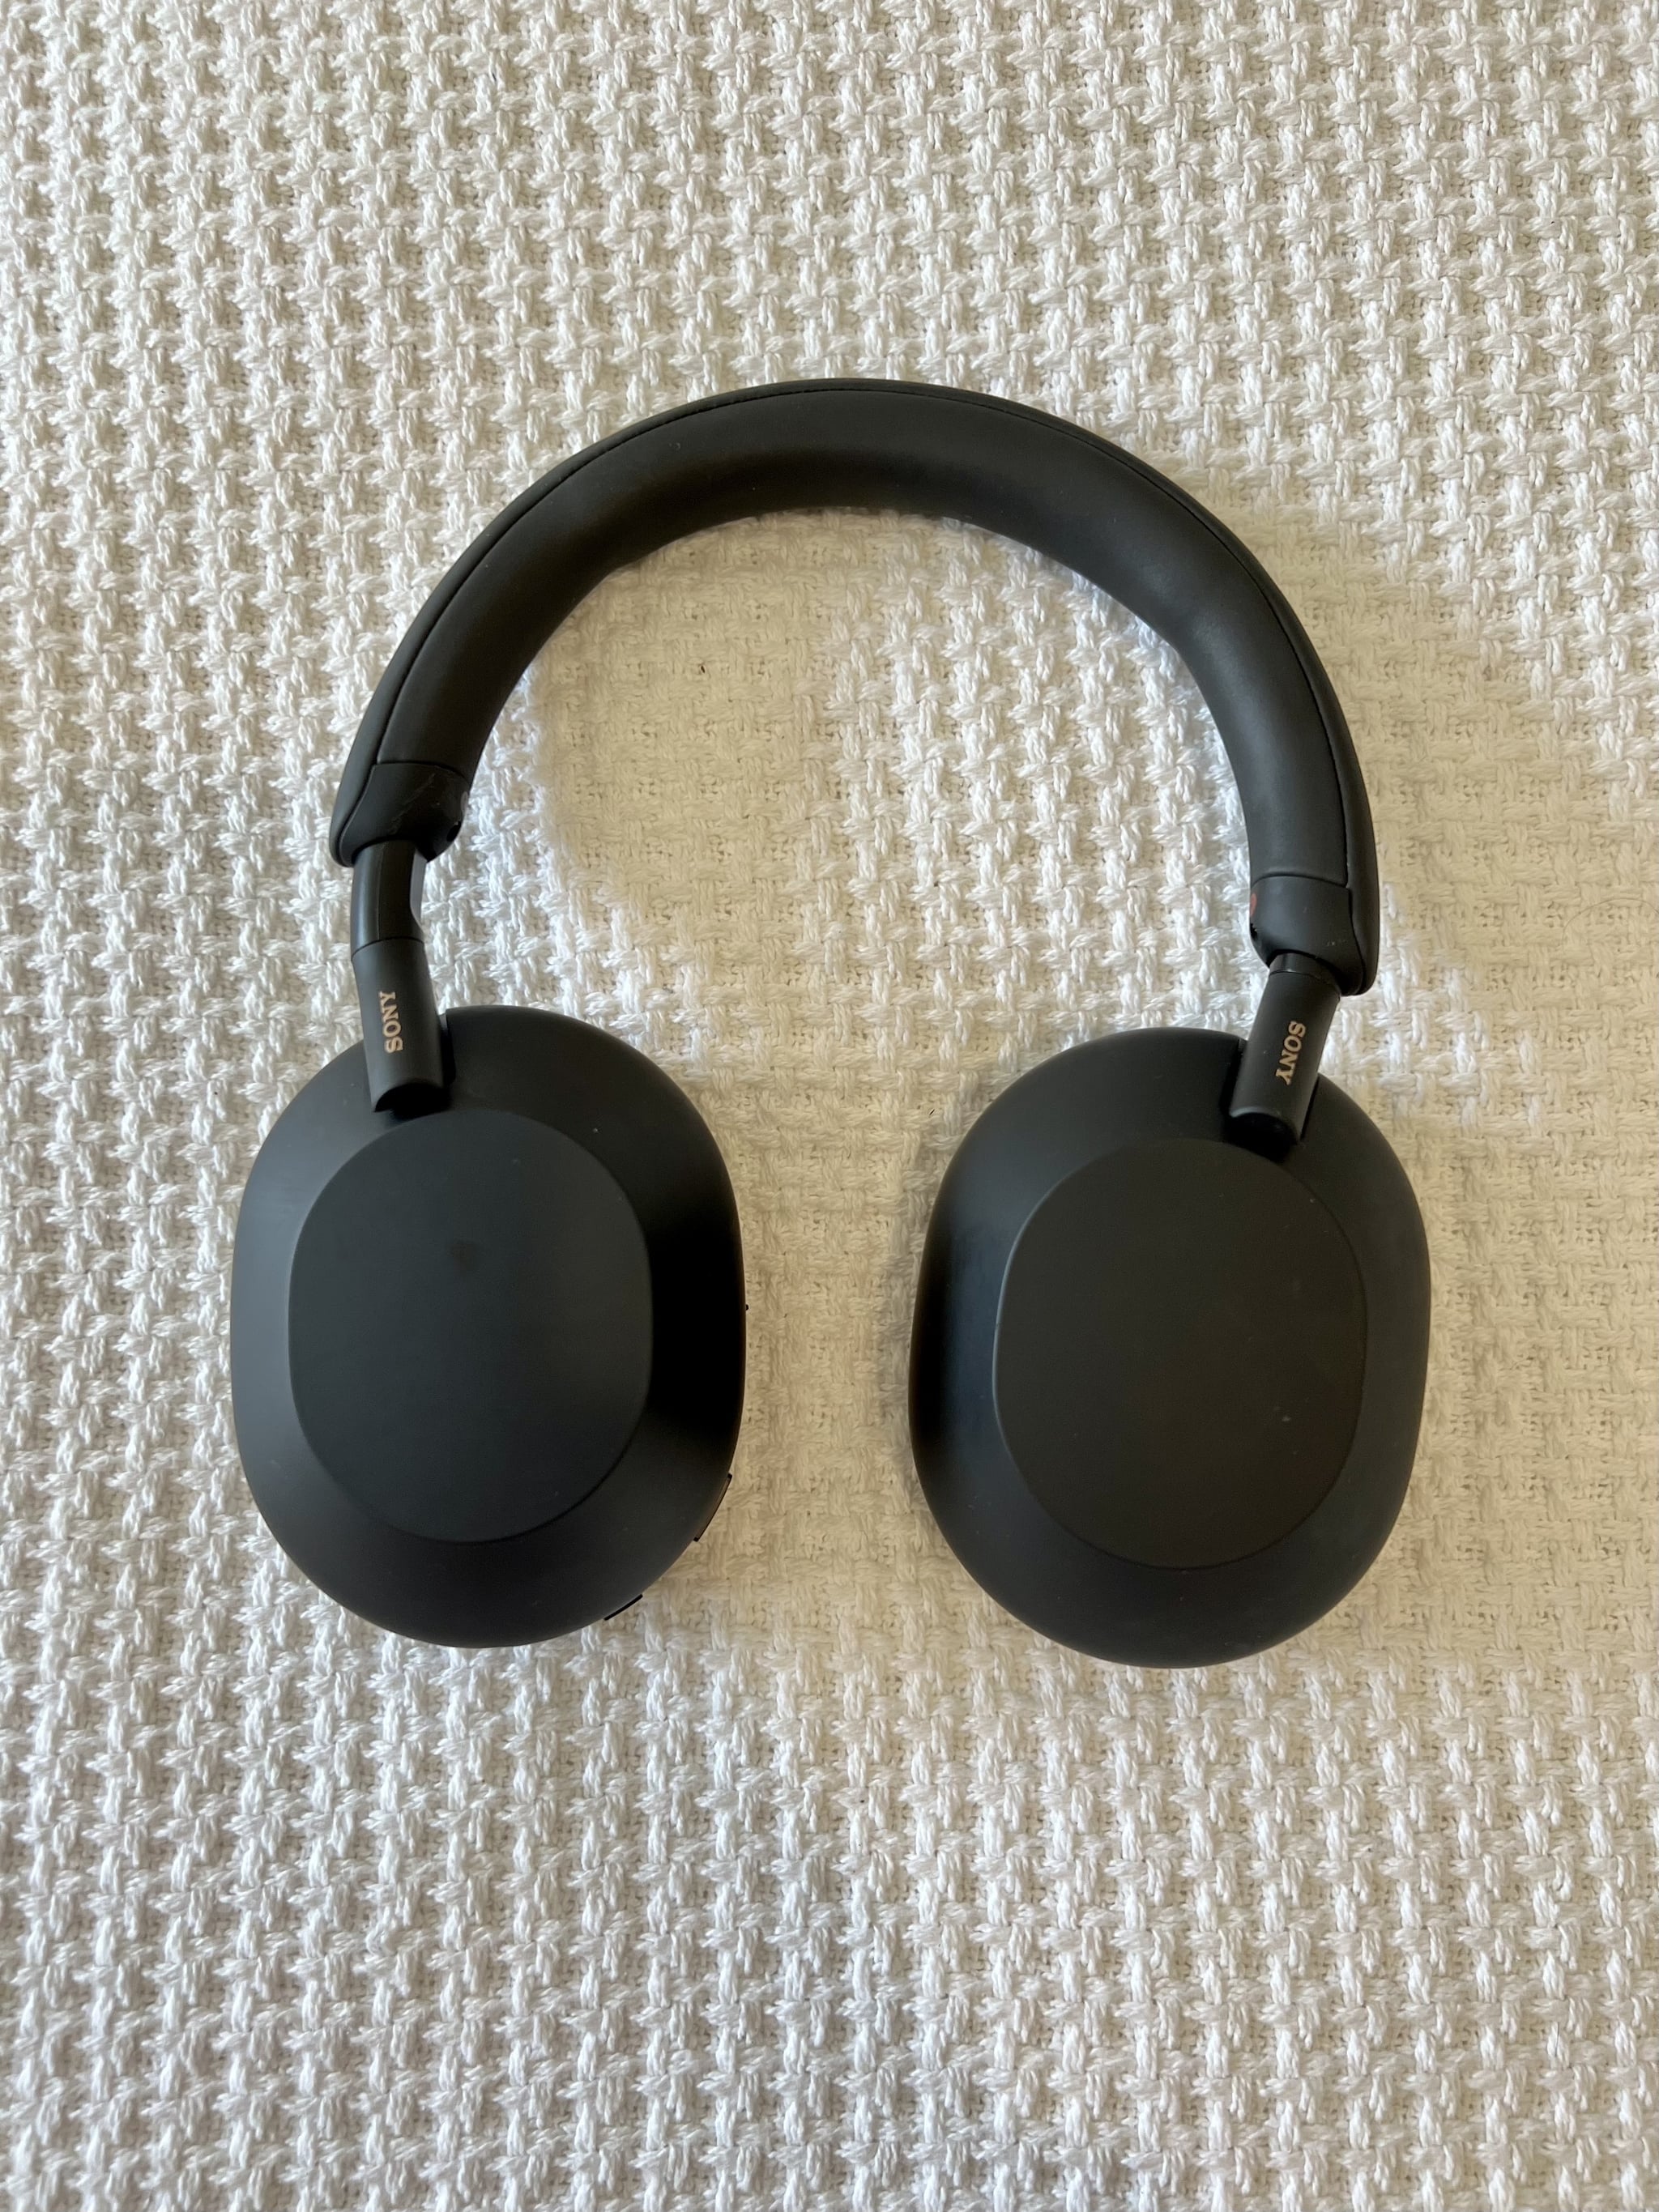 The Sony WH-1000XM5 Noise Canceling Headphones on white surface.